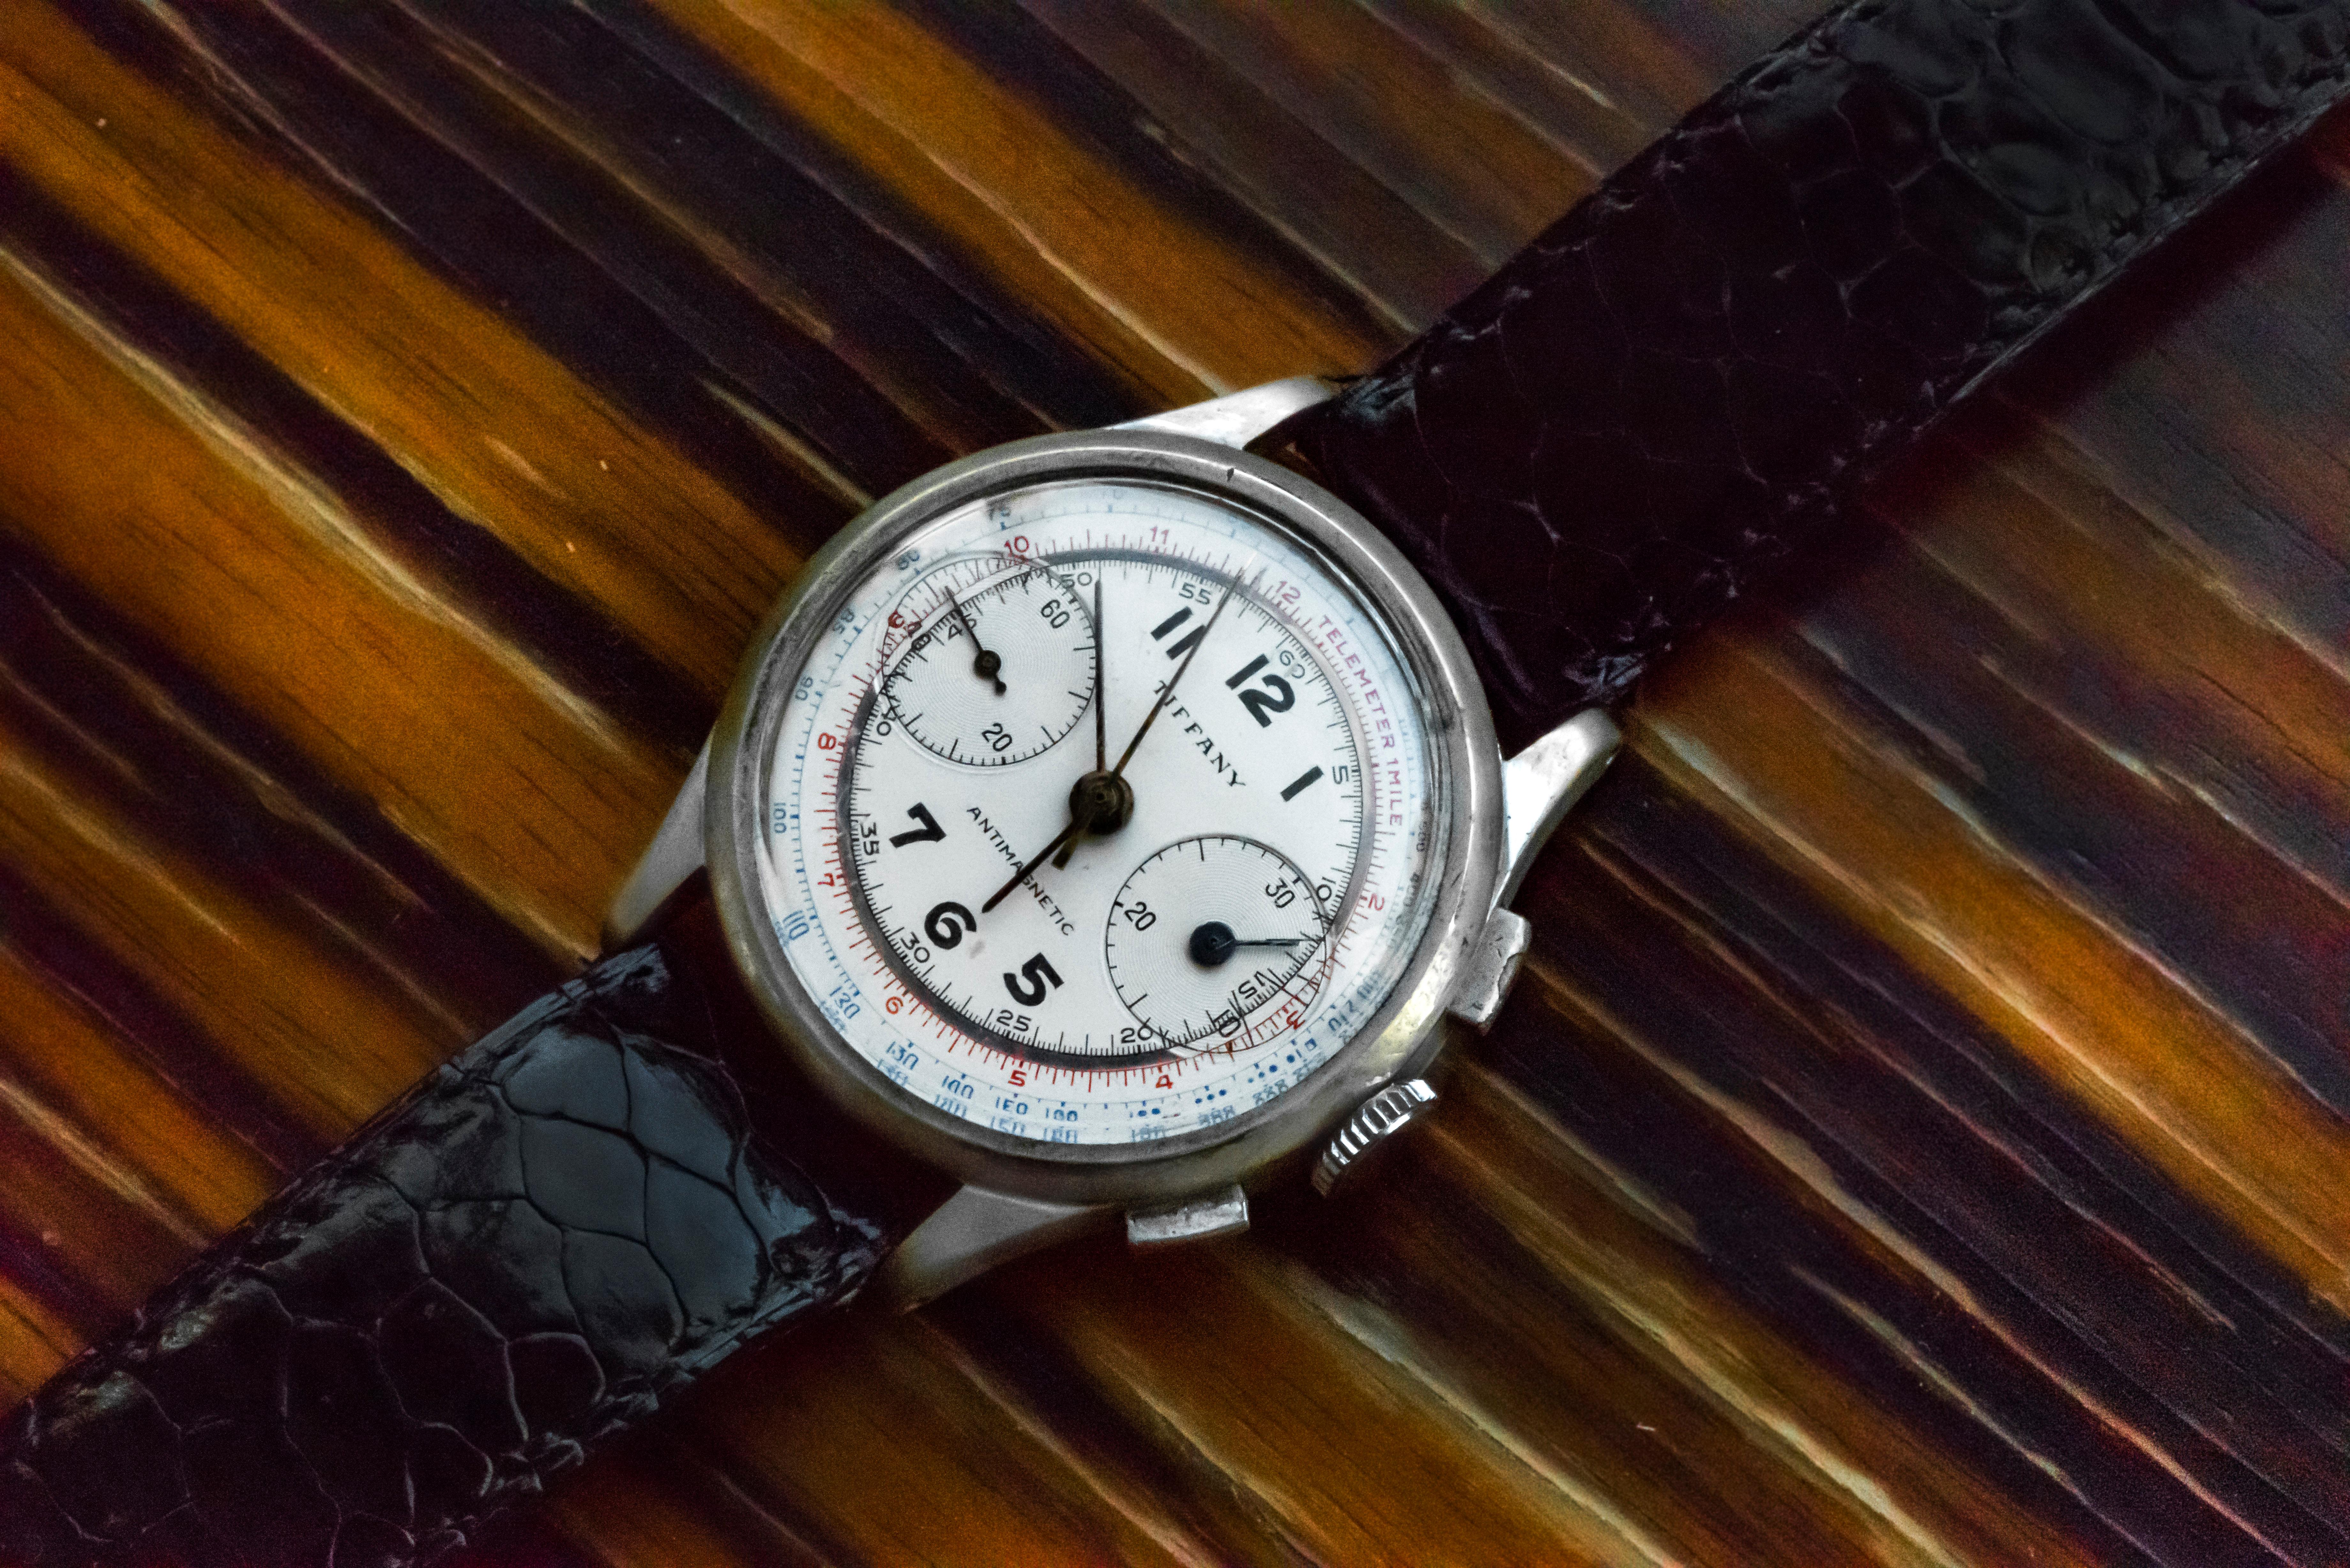  1940s  Tiffany Chronograph Telemeter 

During this timeframe, Tiffany has been associated with with some of the worlds most premier and historic vintage chronograph of this period , primarily adding Additional value as a collaborator You can find